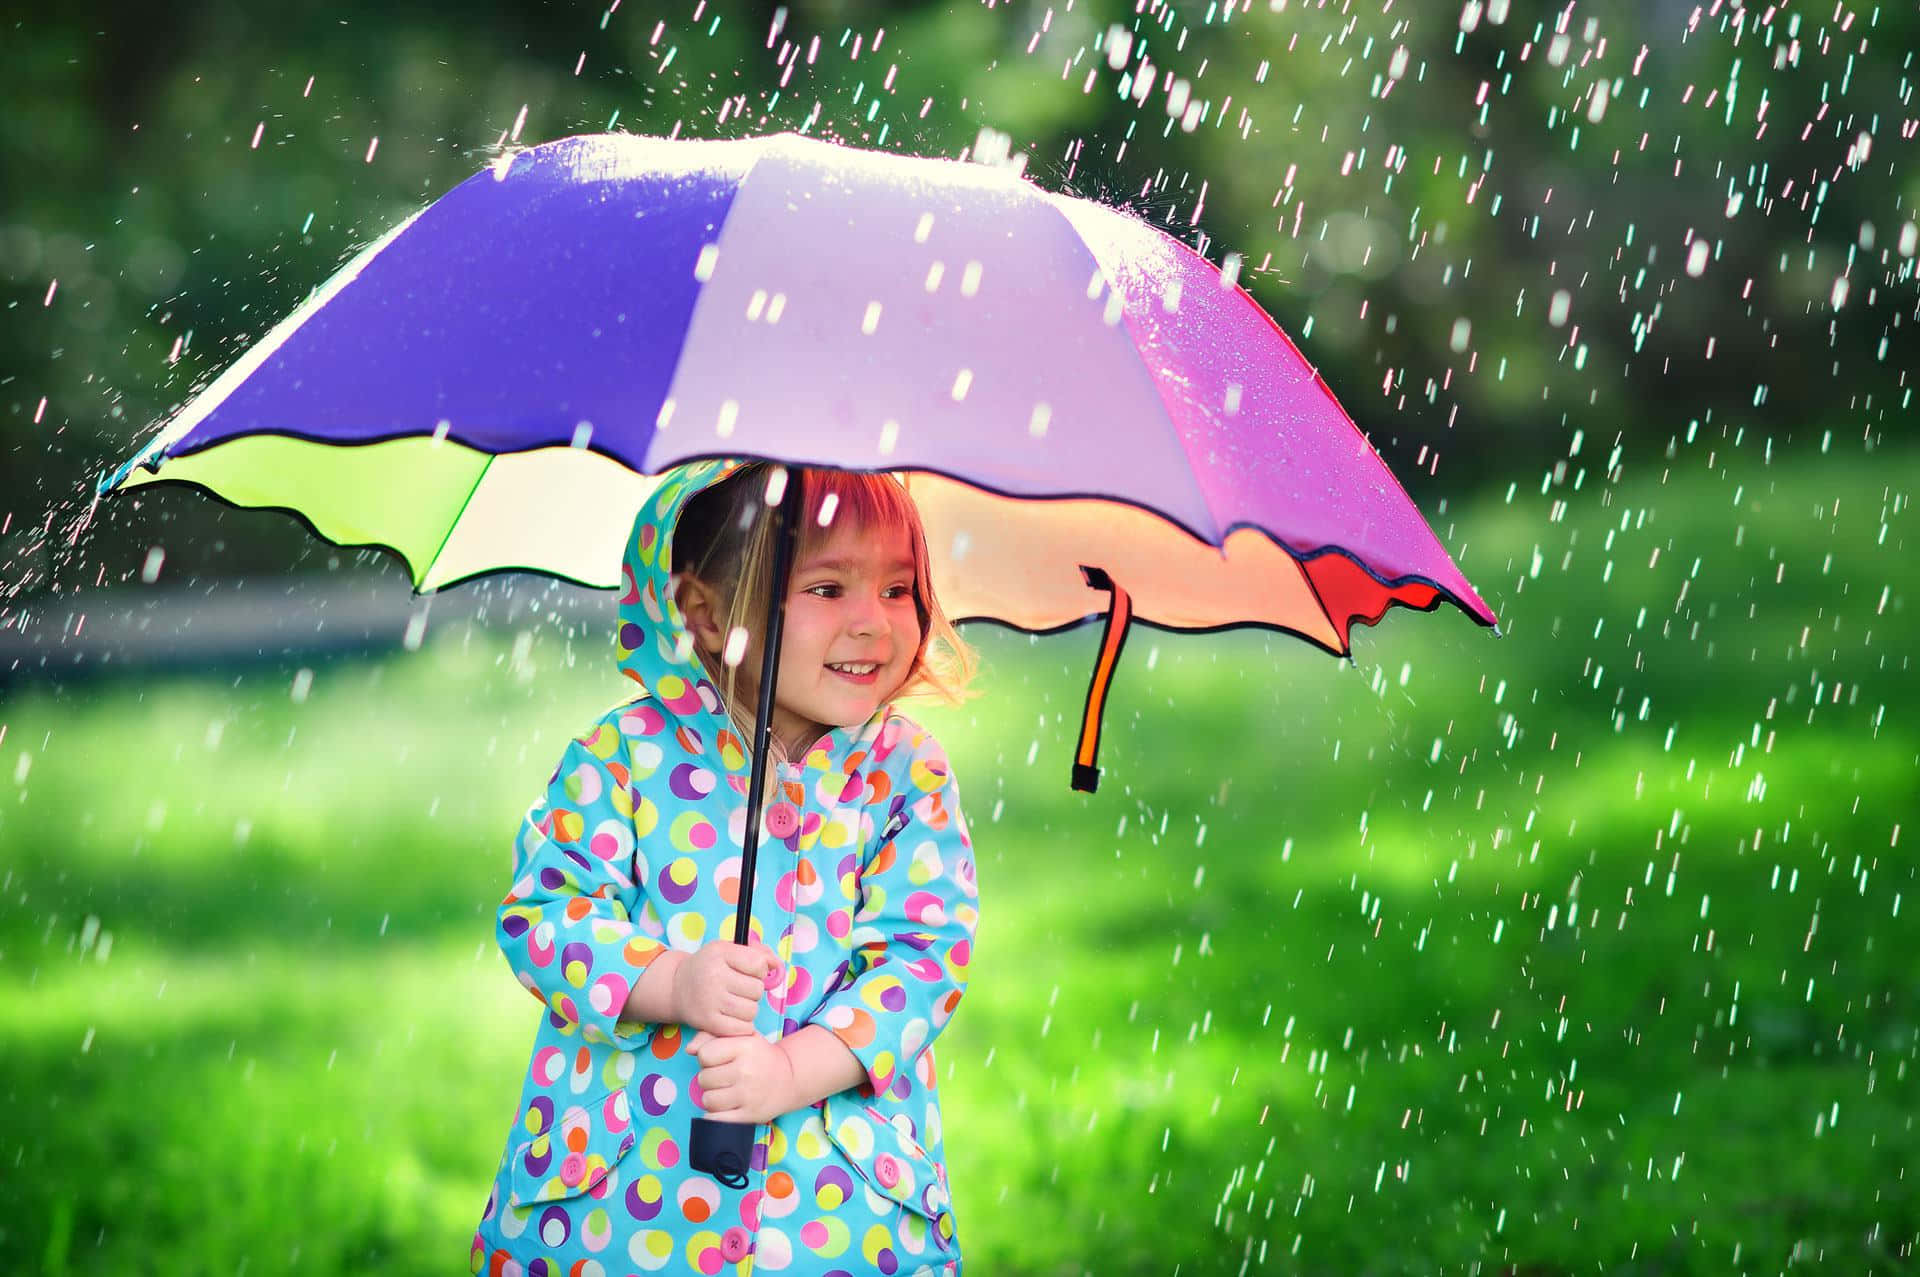 Little Girl With Umbrella On A Rainy Day Picture